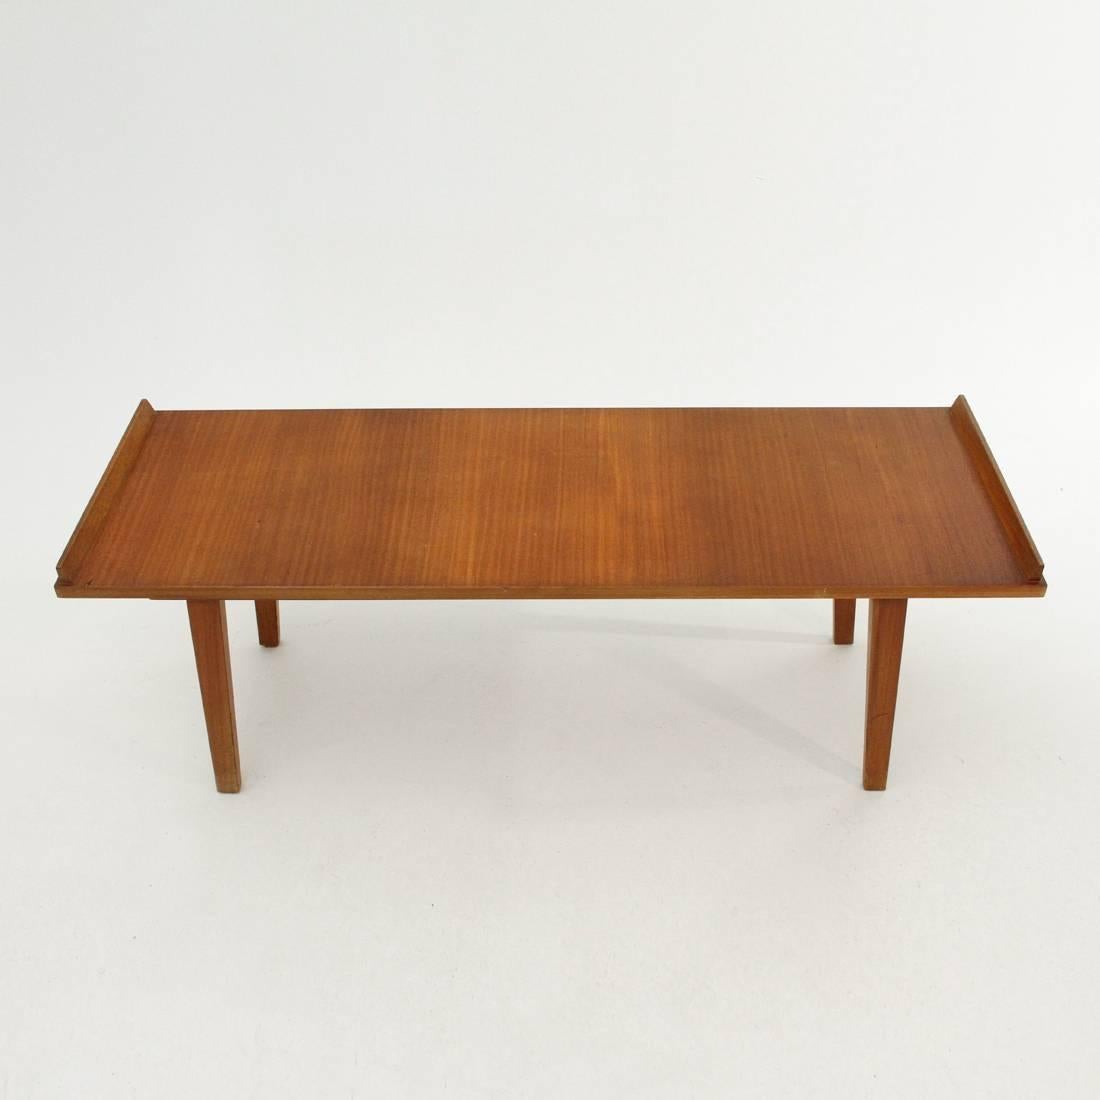 Italian production table from the 1950s.
Top and legs in veneered wood.
Side upper edge.
Good condition, some signs and lack of veneer due to normal use over time.

Dimensions: width 121 cm x depth 40.5 cm x height 42 cm.
 